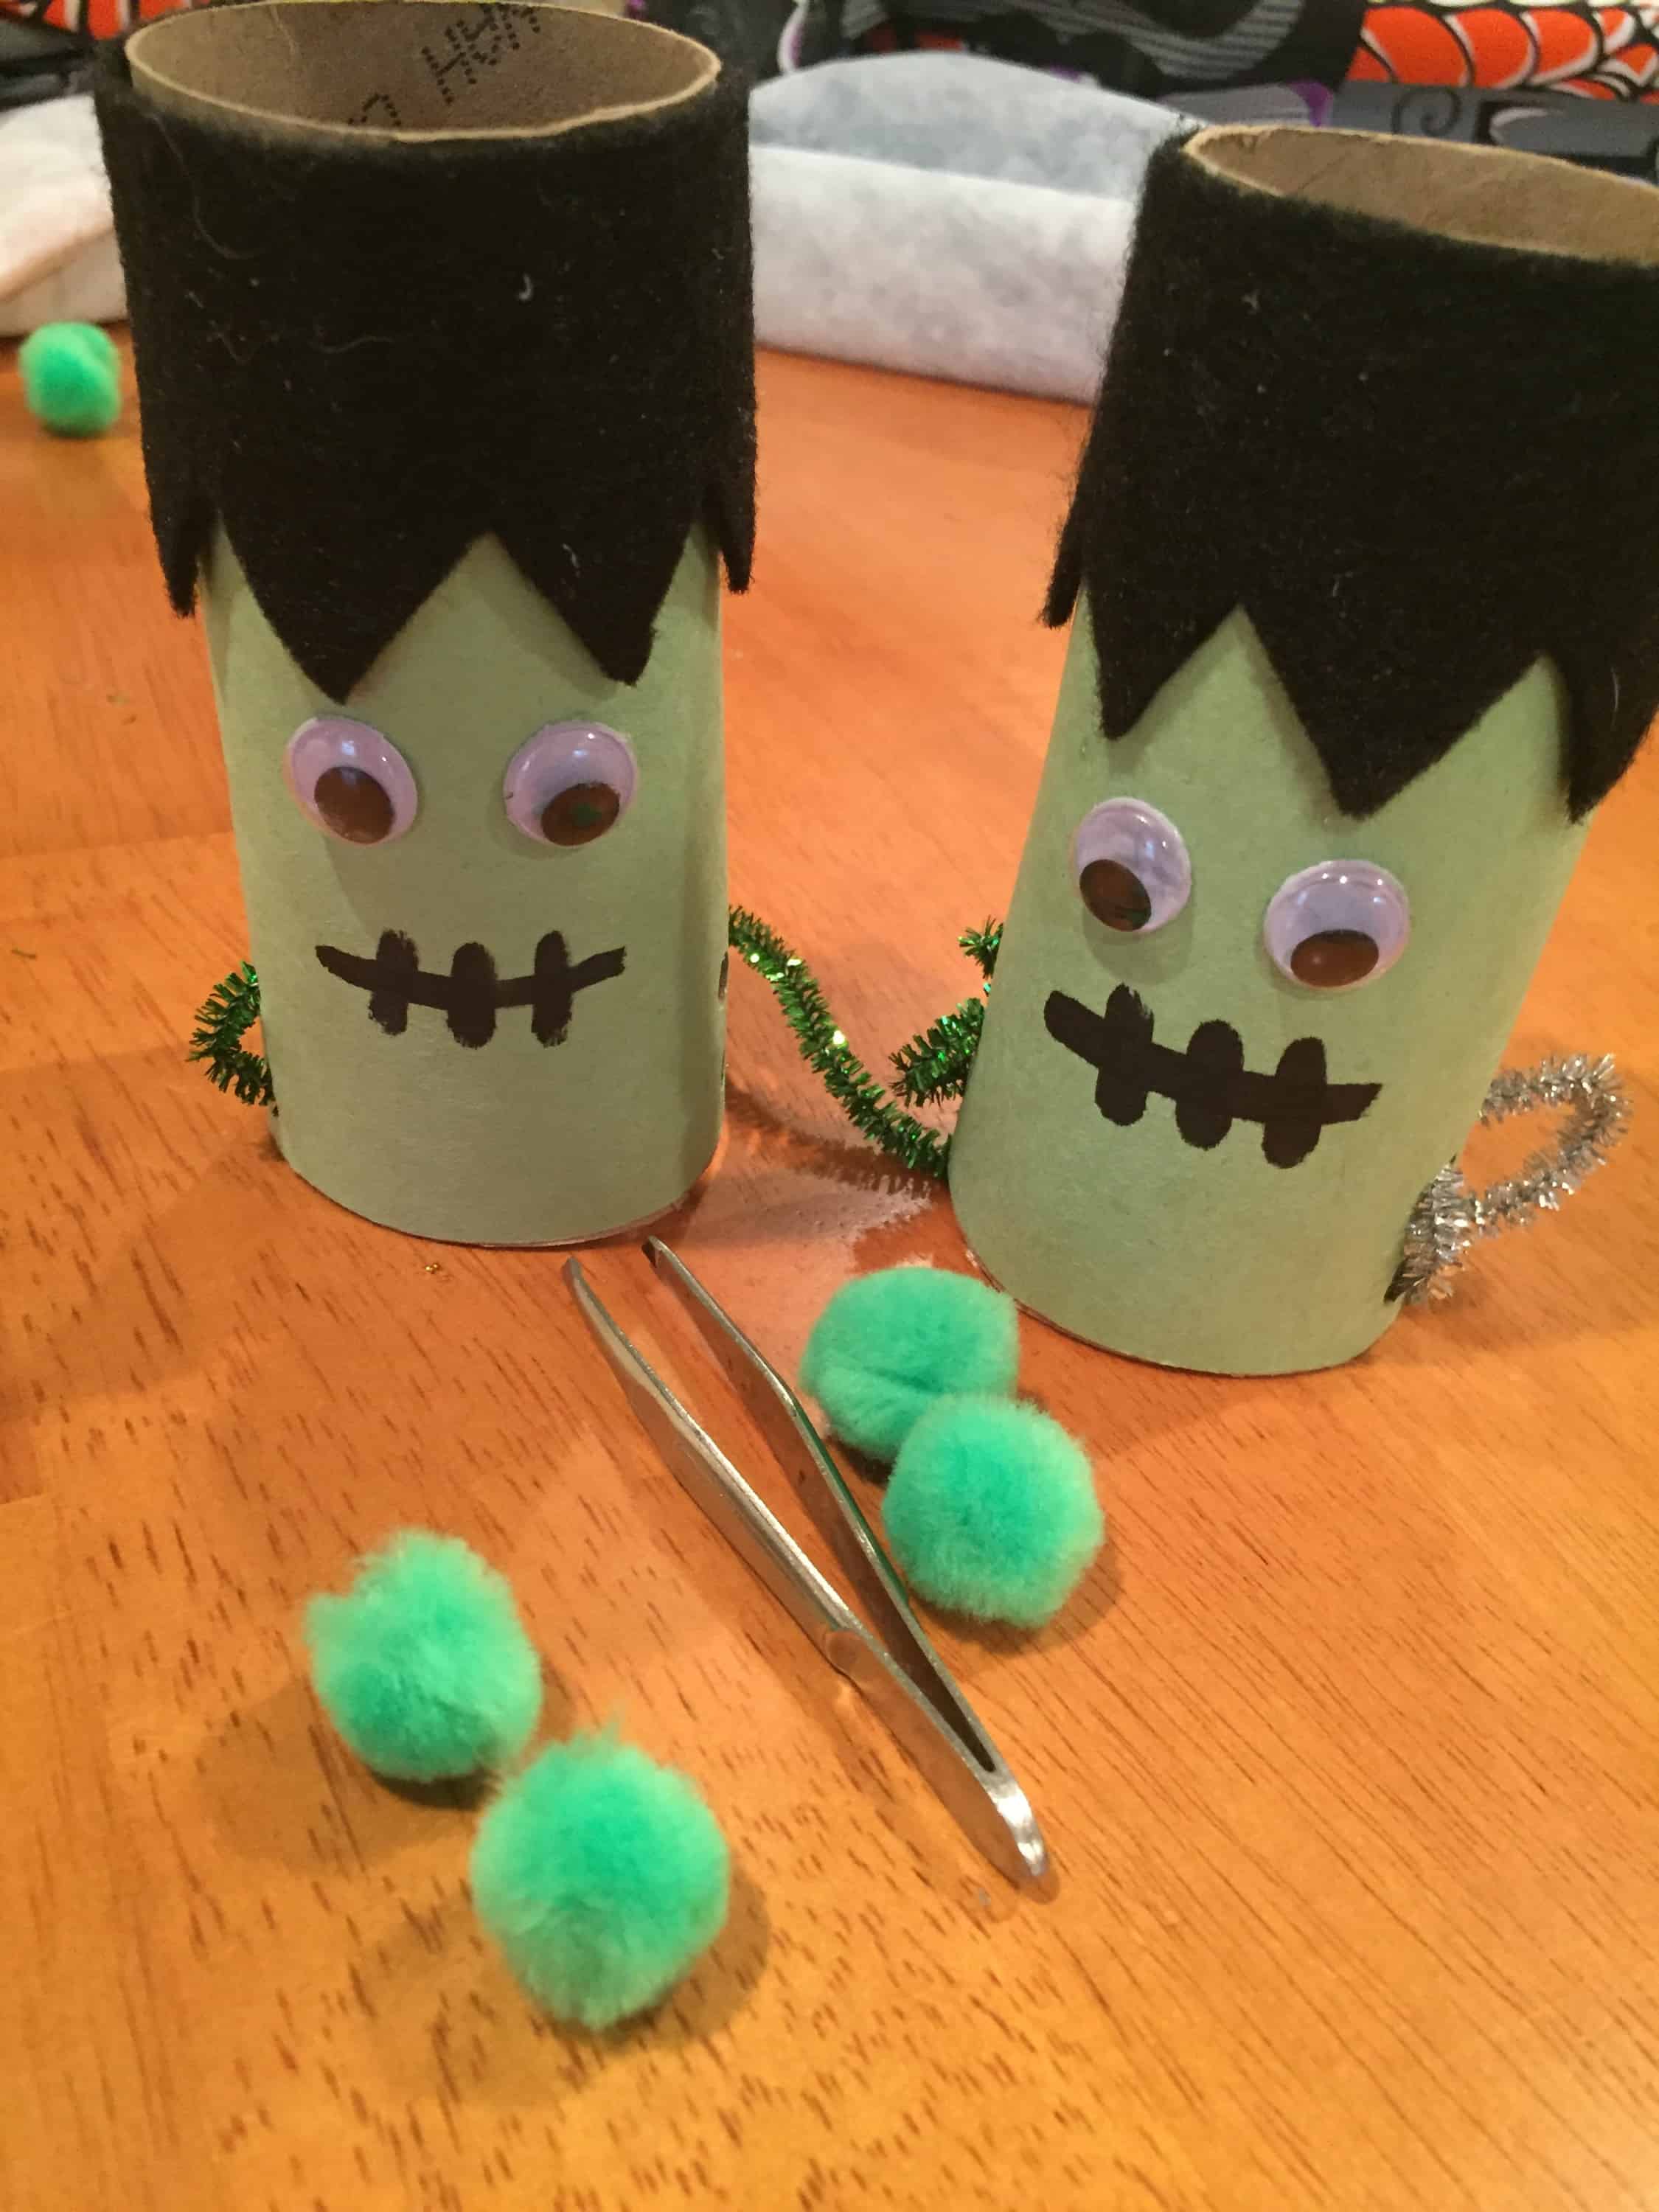 This simple up cycled Halloween craft is perfect for fine motor practice and serves as a great homemade game! Doubles as cute decor!